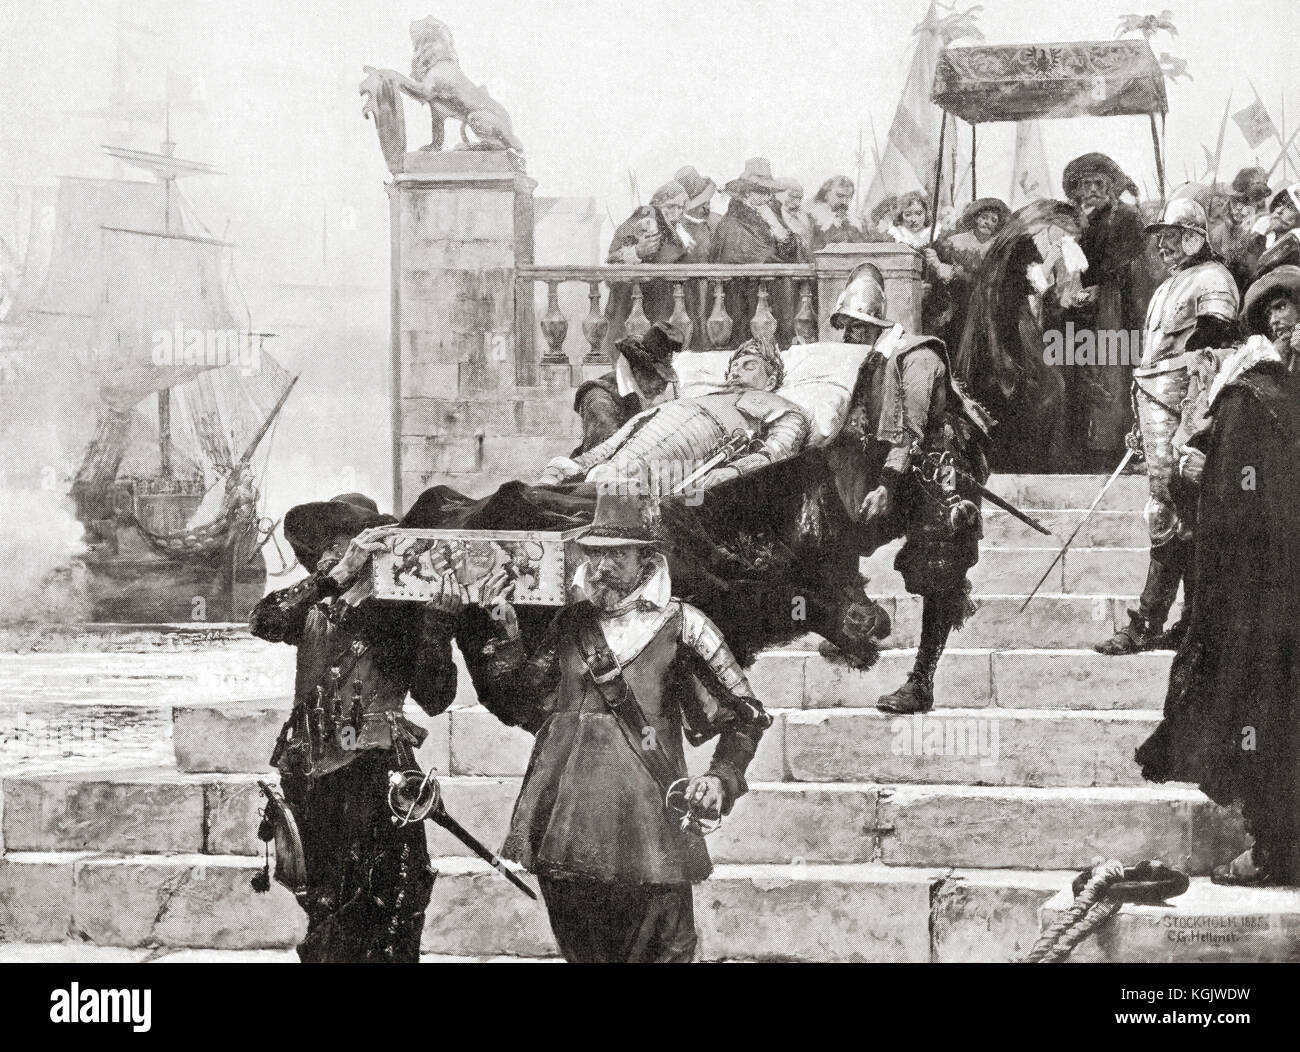 Conveying the body of Gustavus Adolphus to the ship at Wolgast for transfer to Sweden after his death at The Battle of Lützen, November 6, 1632.  Gustav II Adolf, 1594 – 1632, aka Gustavus Adolphus or Gustav II Adolph.  King of Sweden from 1611 to 1632.  From Hutchinson's History of the Nations, published 1915. Stock Photo